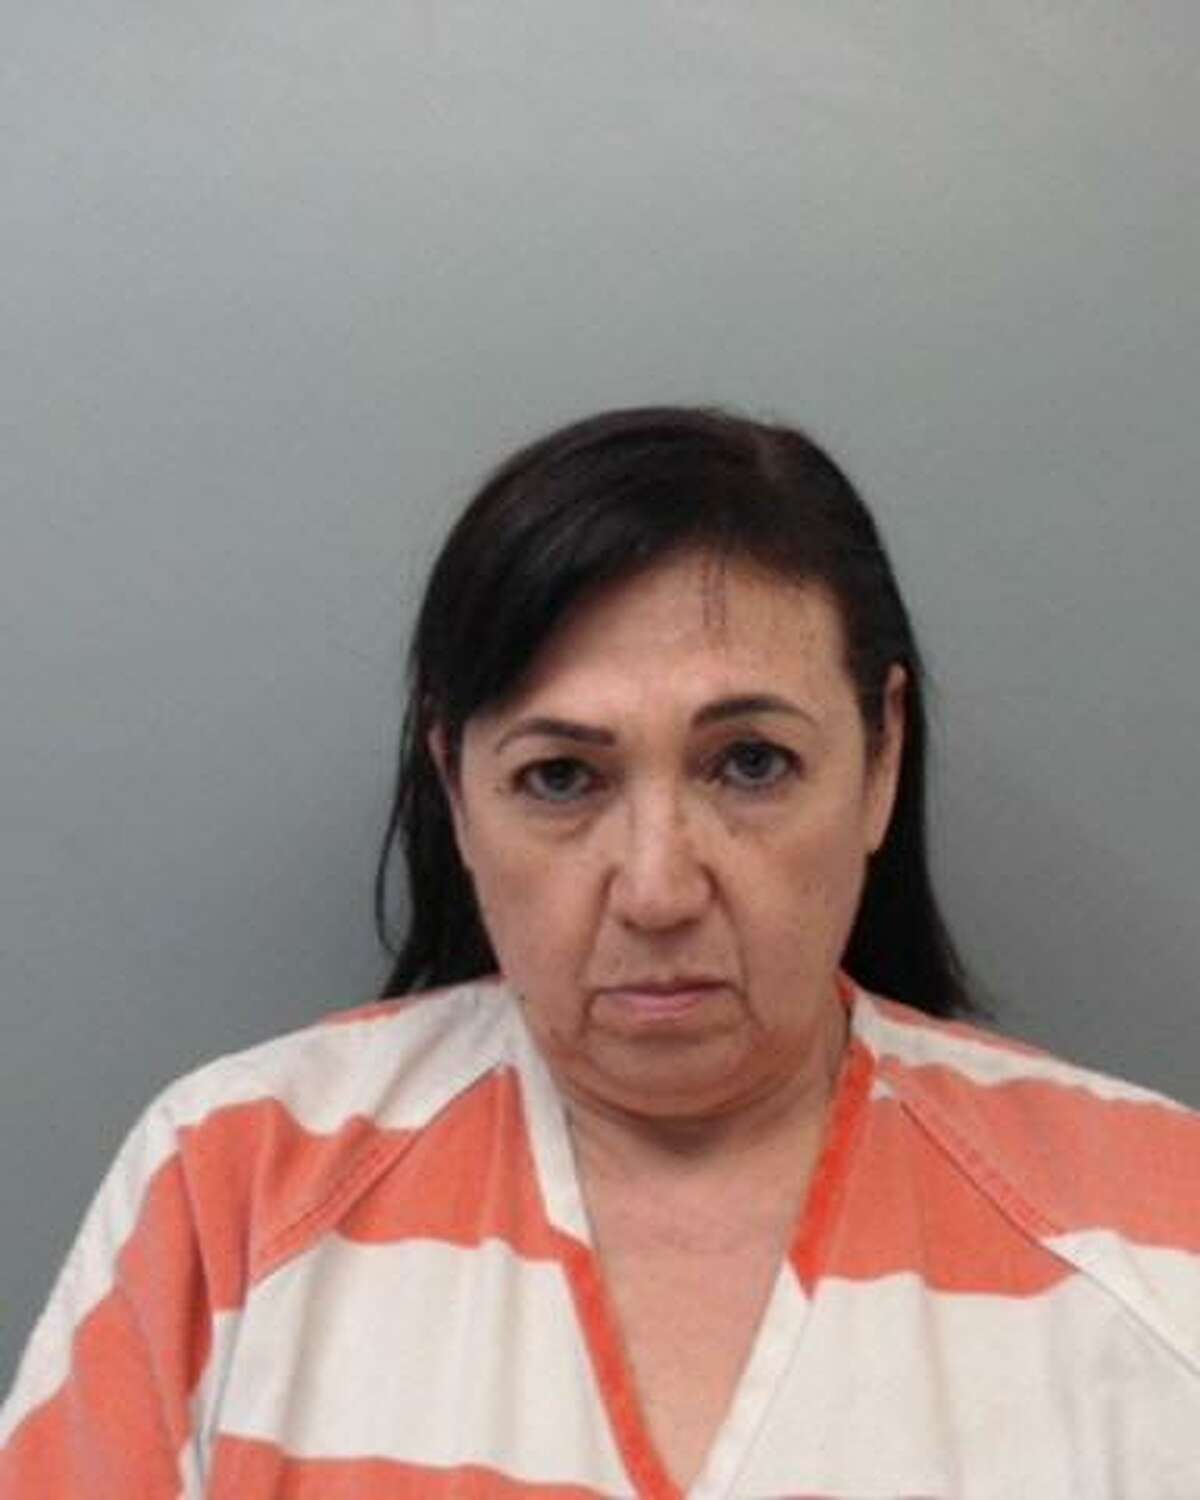 Leticia Cantu de Calzada, 59, was charged with gambling promotion and engaging in organized criminal activity.